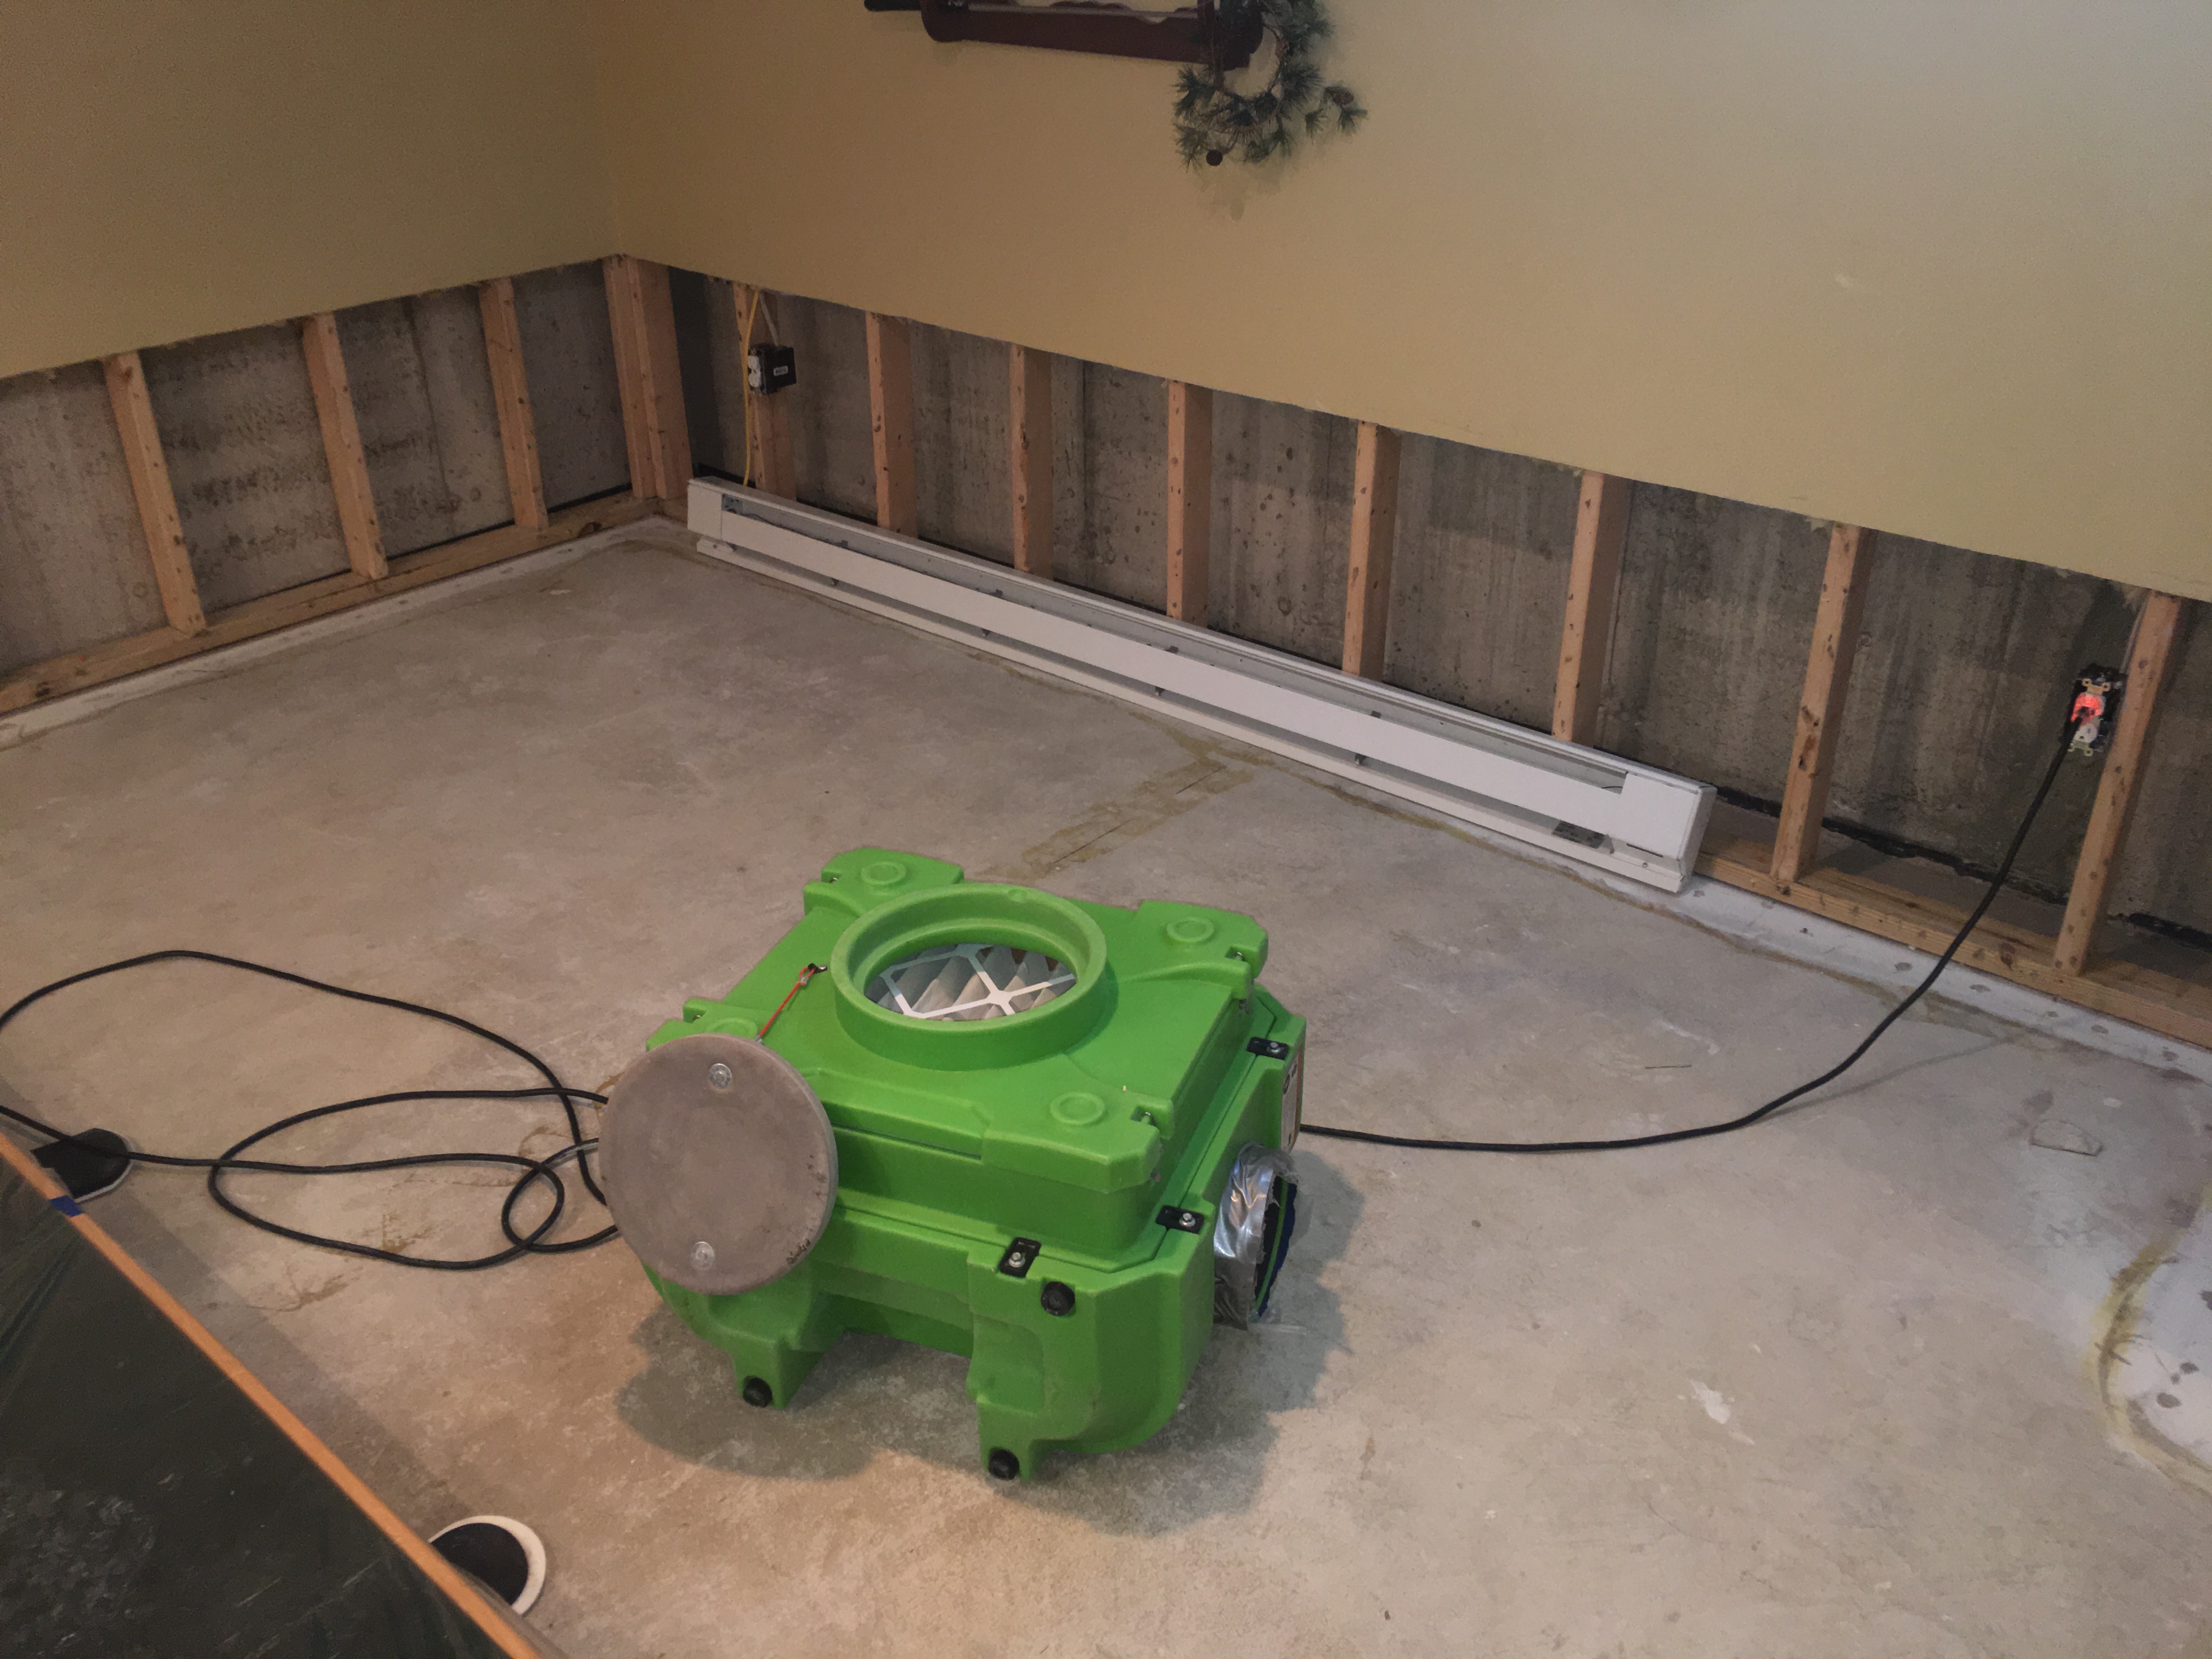 The SERVPRO equipment is up and running after a water loss.